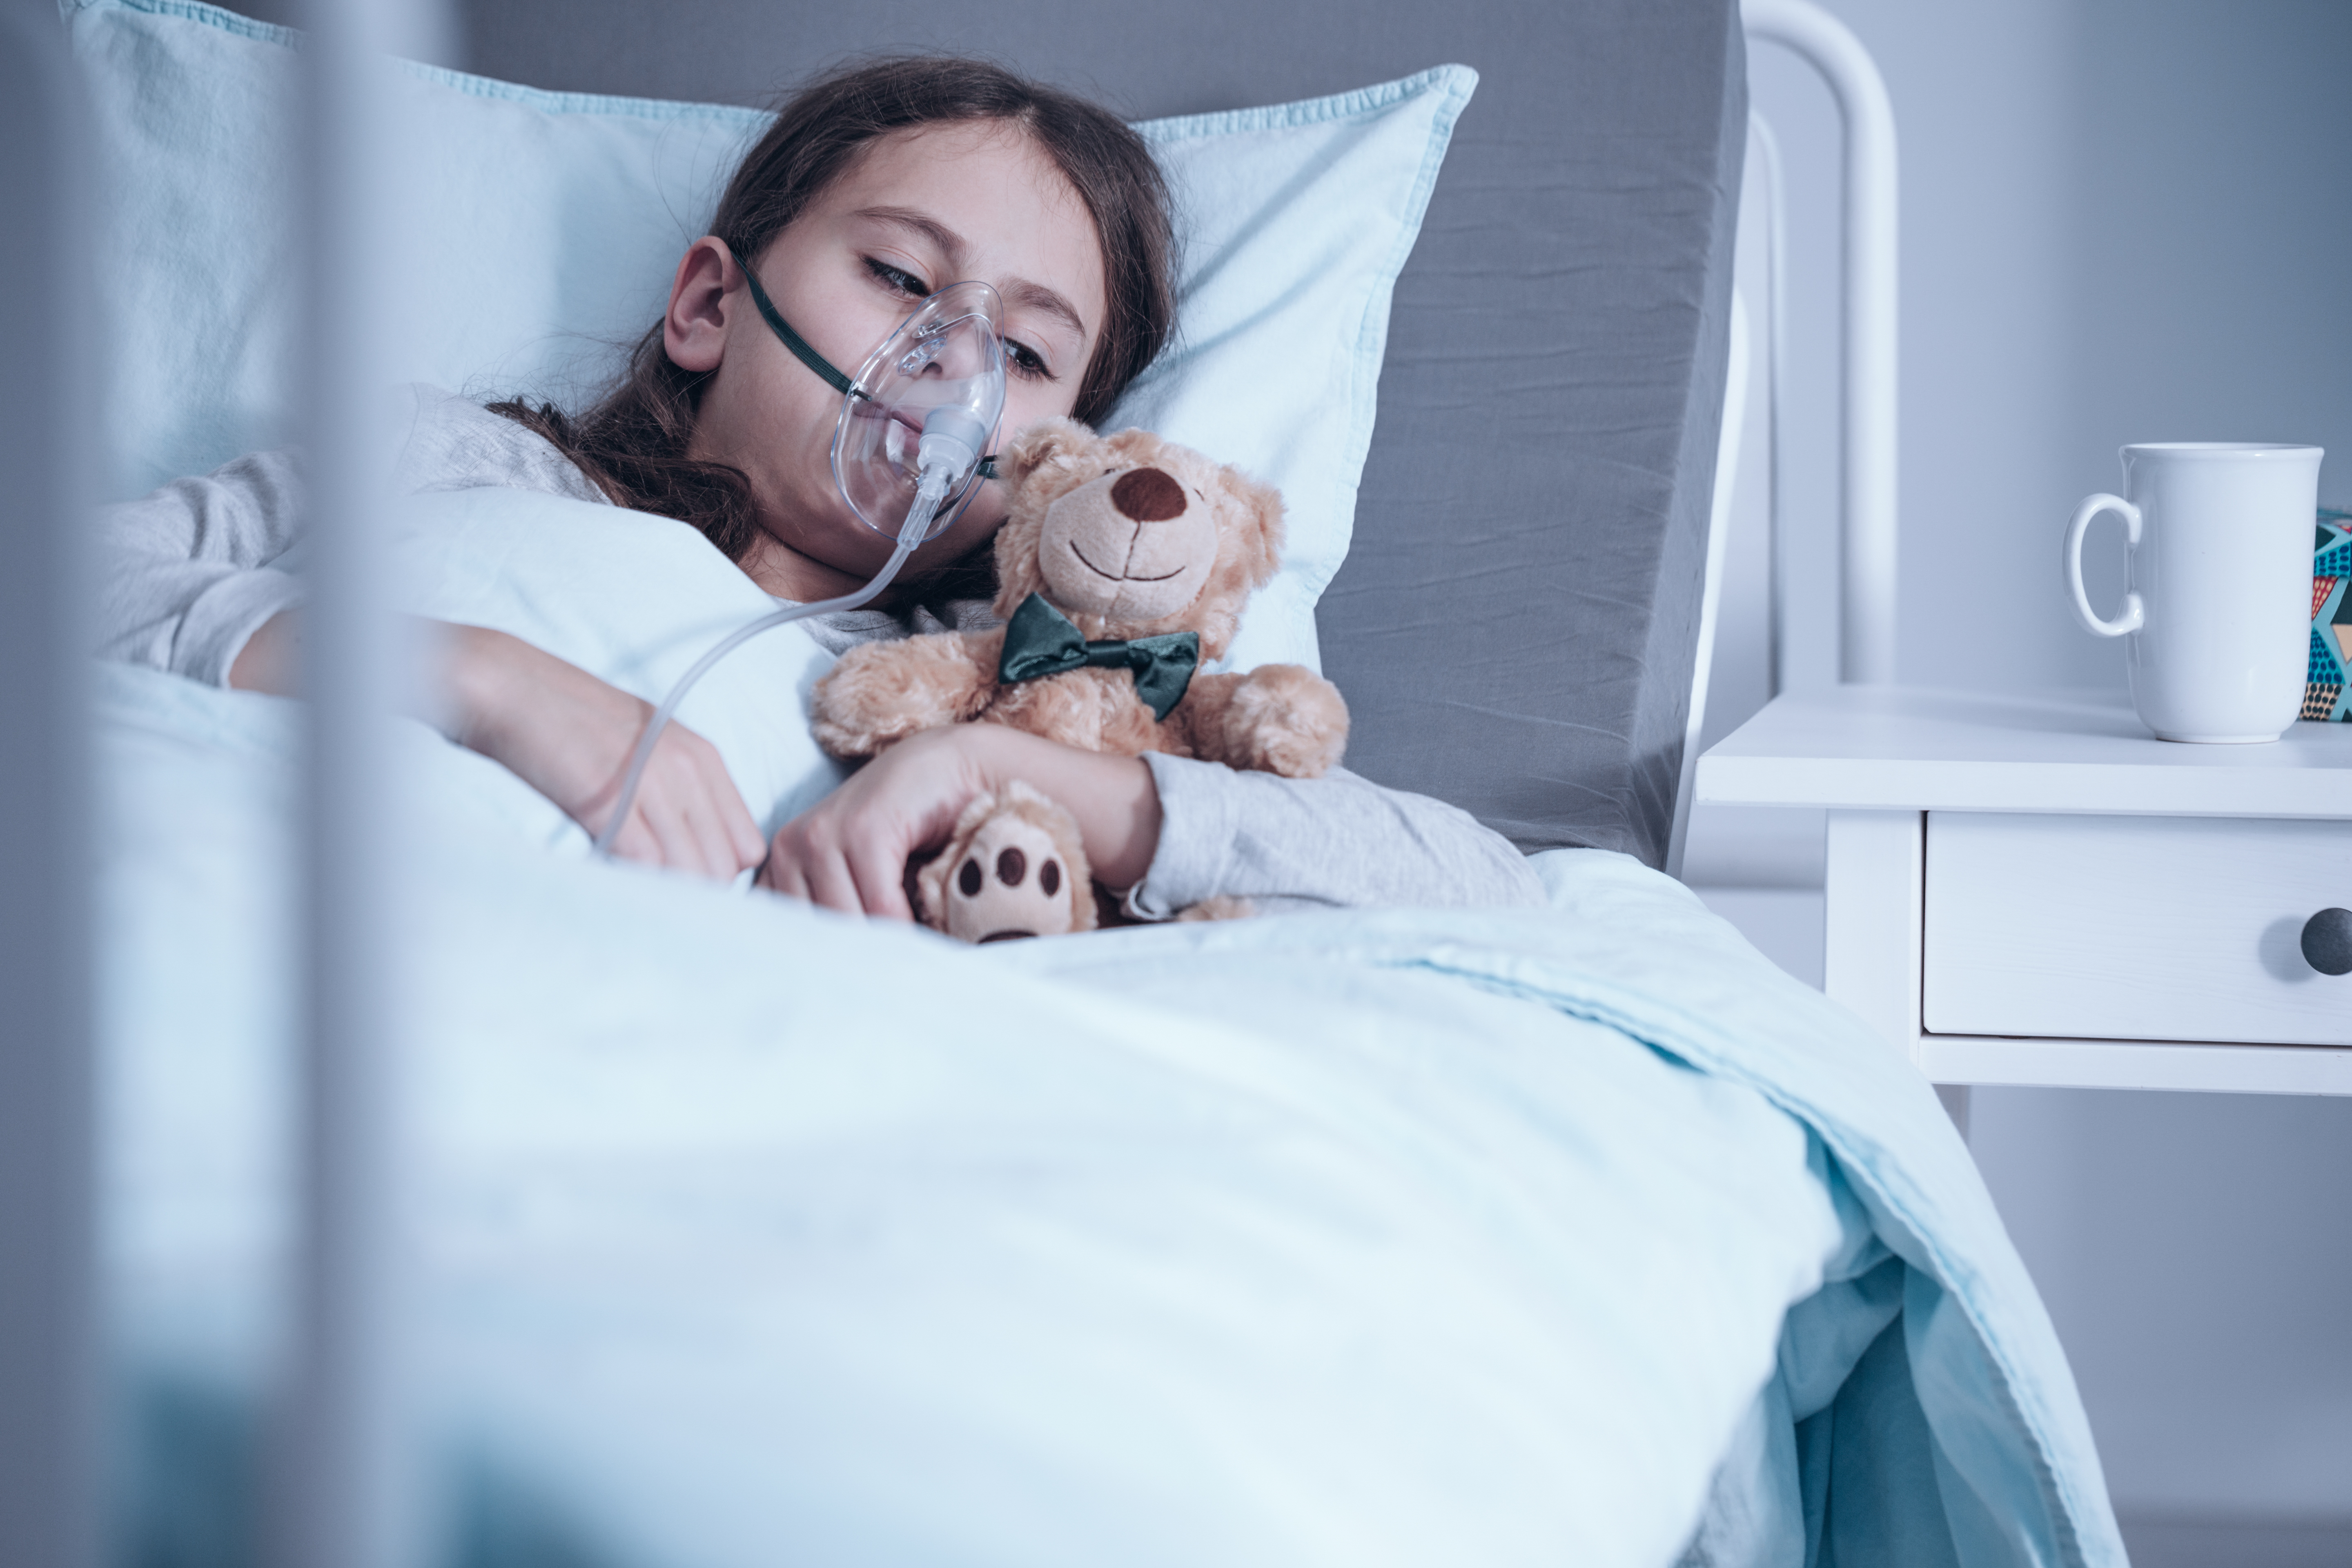 Young girl is lying in hospital bed | Source: Shutterstock.com